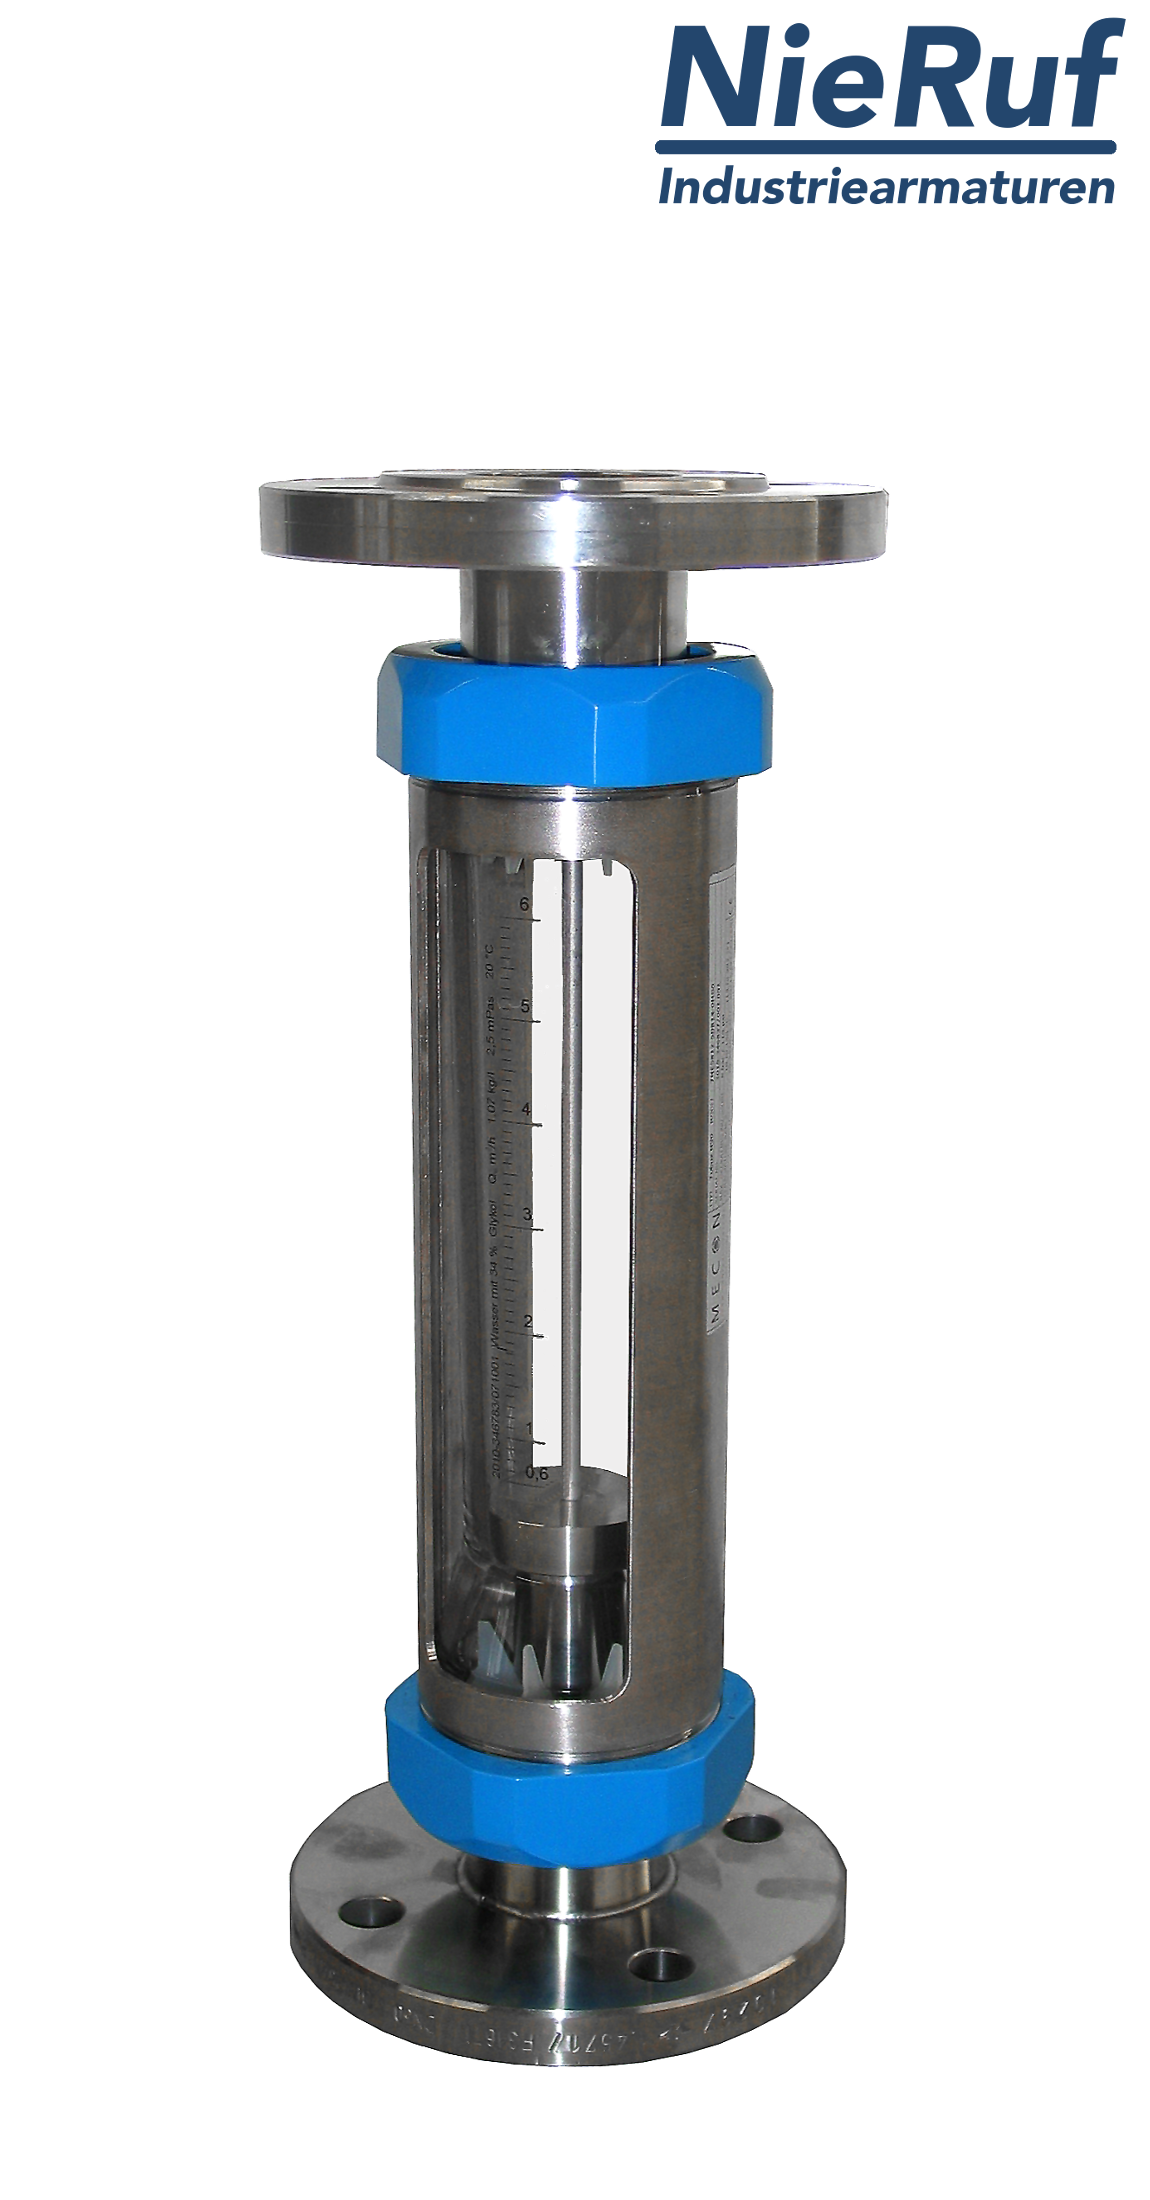 Variable area flowmeter stainless steel + borosilicate flange DN32 125.0 - 1250 l/h water FKM